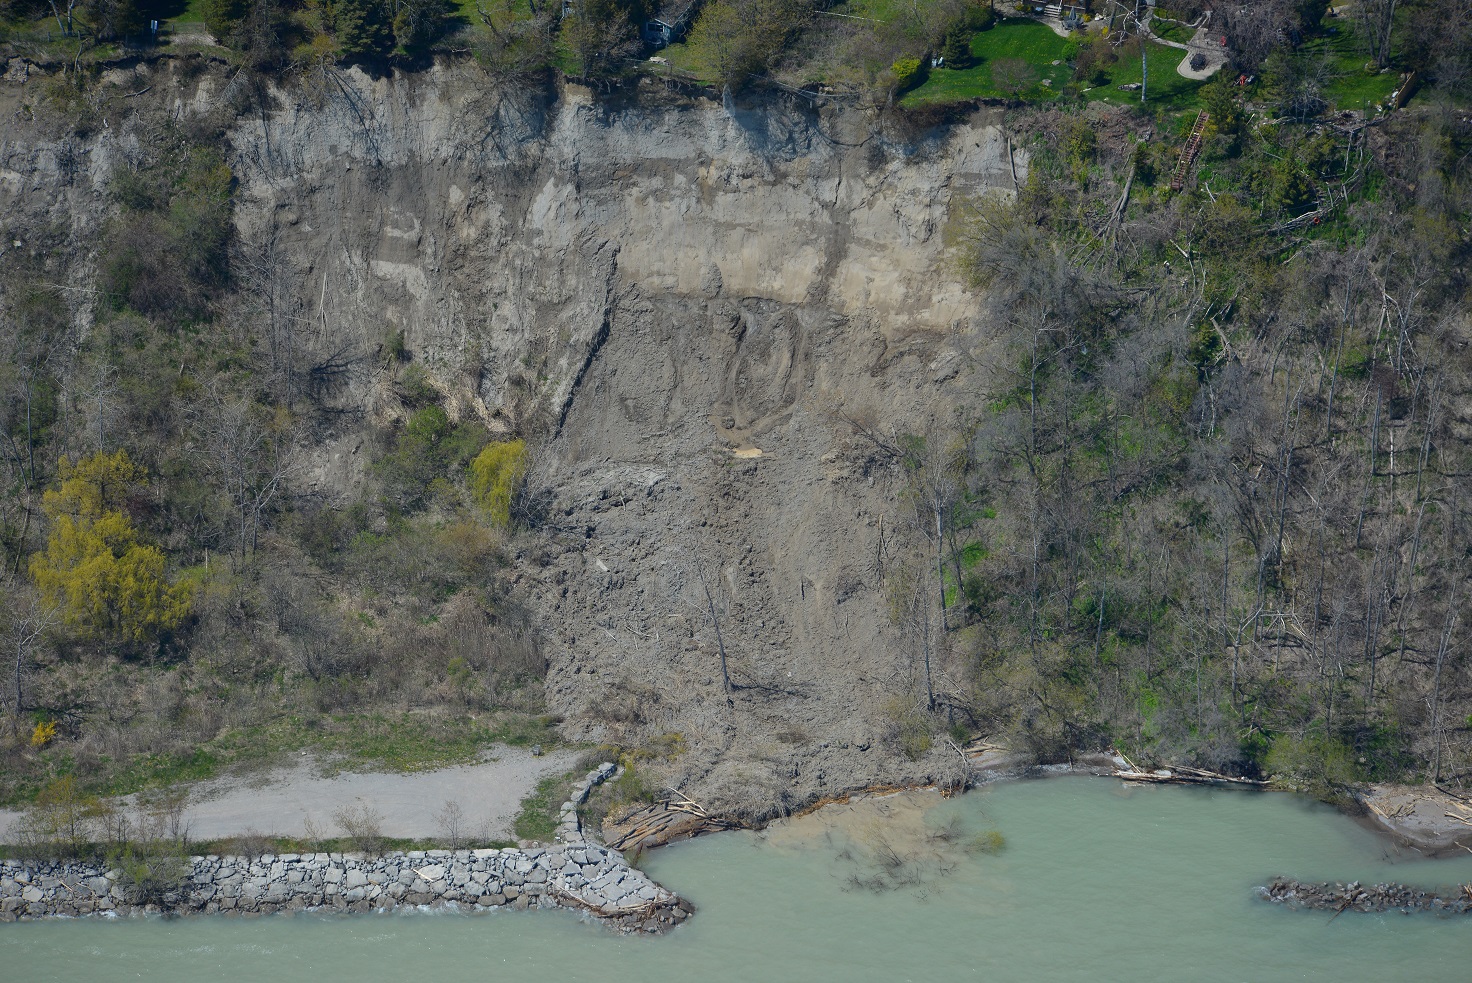 This image was taken from a helicopter and shows a landslide that has settled near the base of a very tall section of the Scarborough Bluffs. At the bottom of the photo, Lake Ontario is visibly turbid due to soil from the landslide being washed into the water. At the bottom left of the image is an dirt access road behind a shoreline revetment structure constructed of large 5 tonne armourstone blocks. The face of the bluff on either side of the slope failure is vegetated with shrubs and trees.